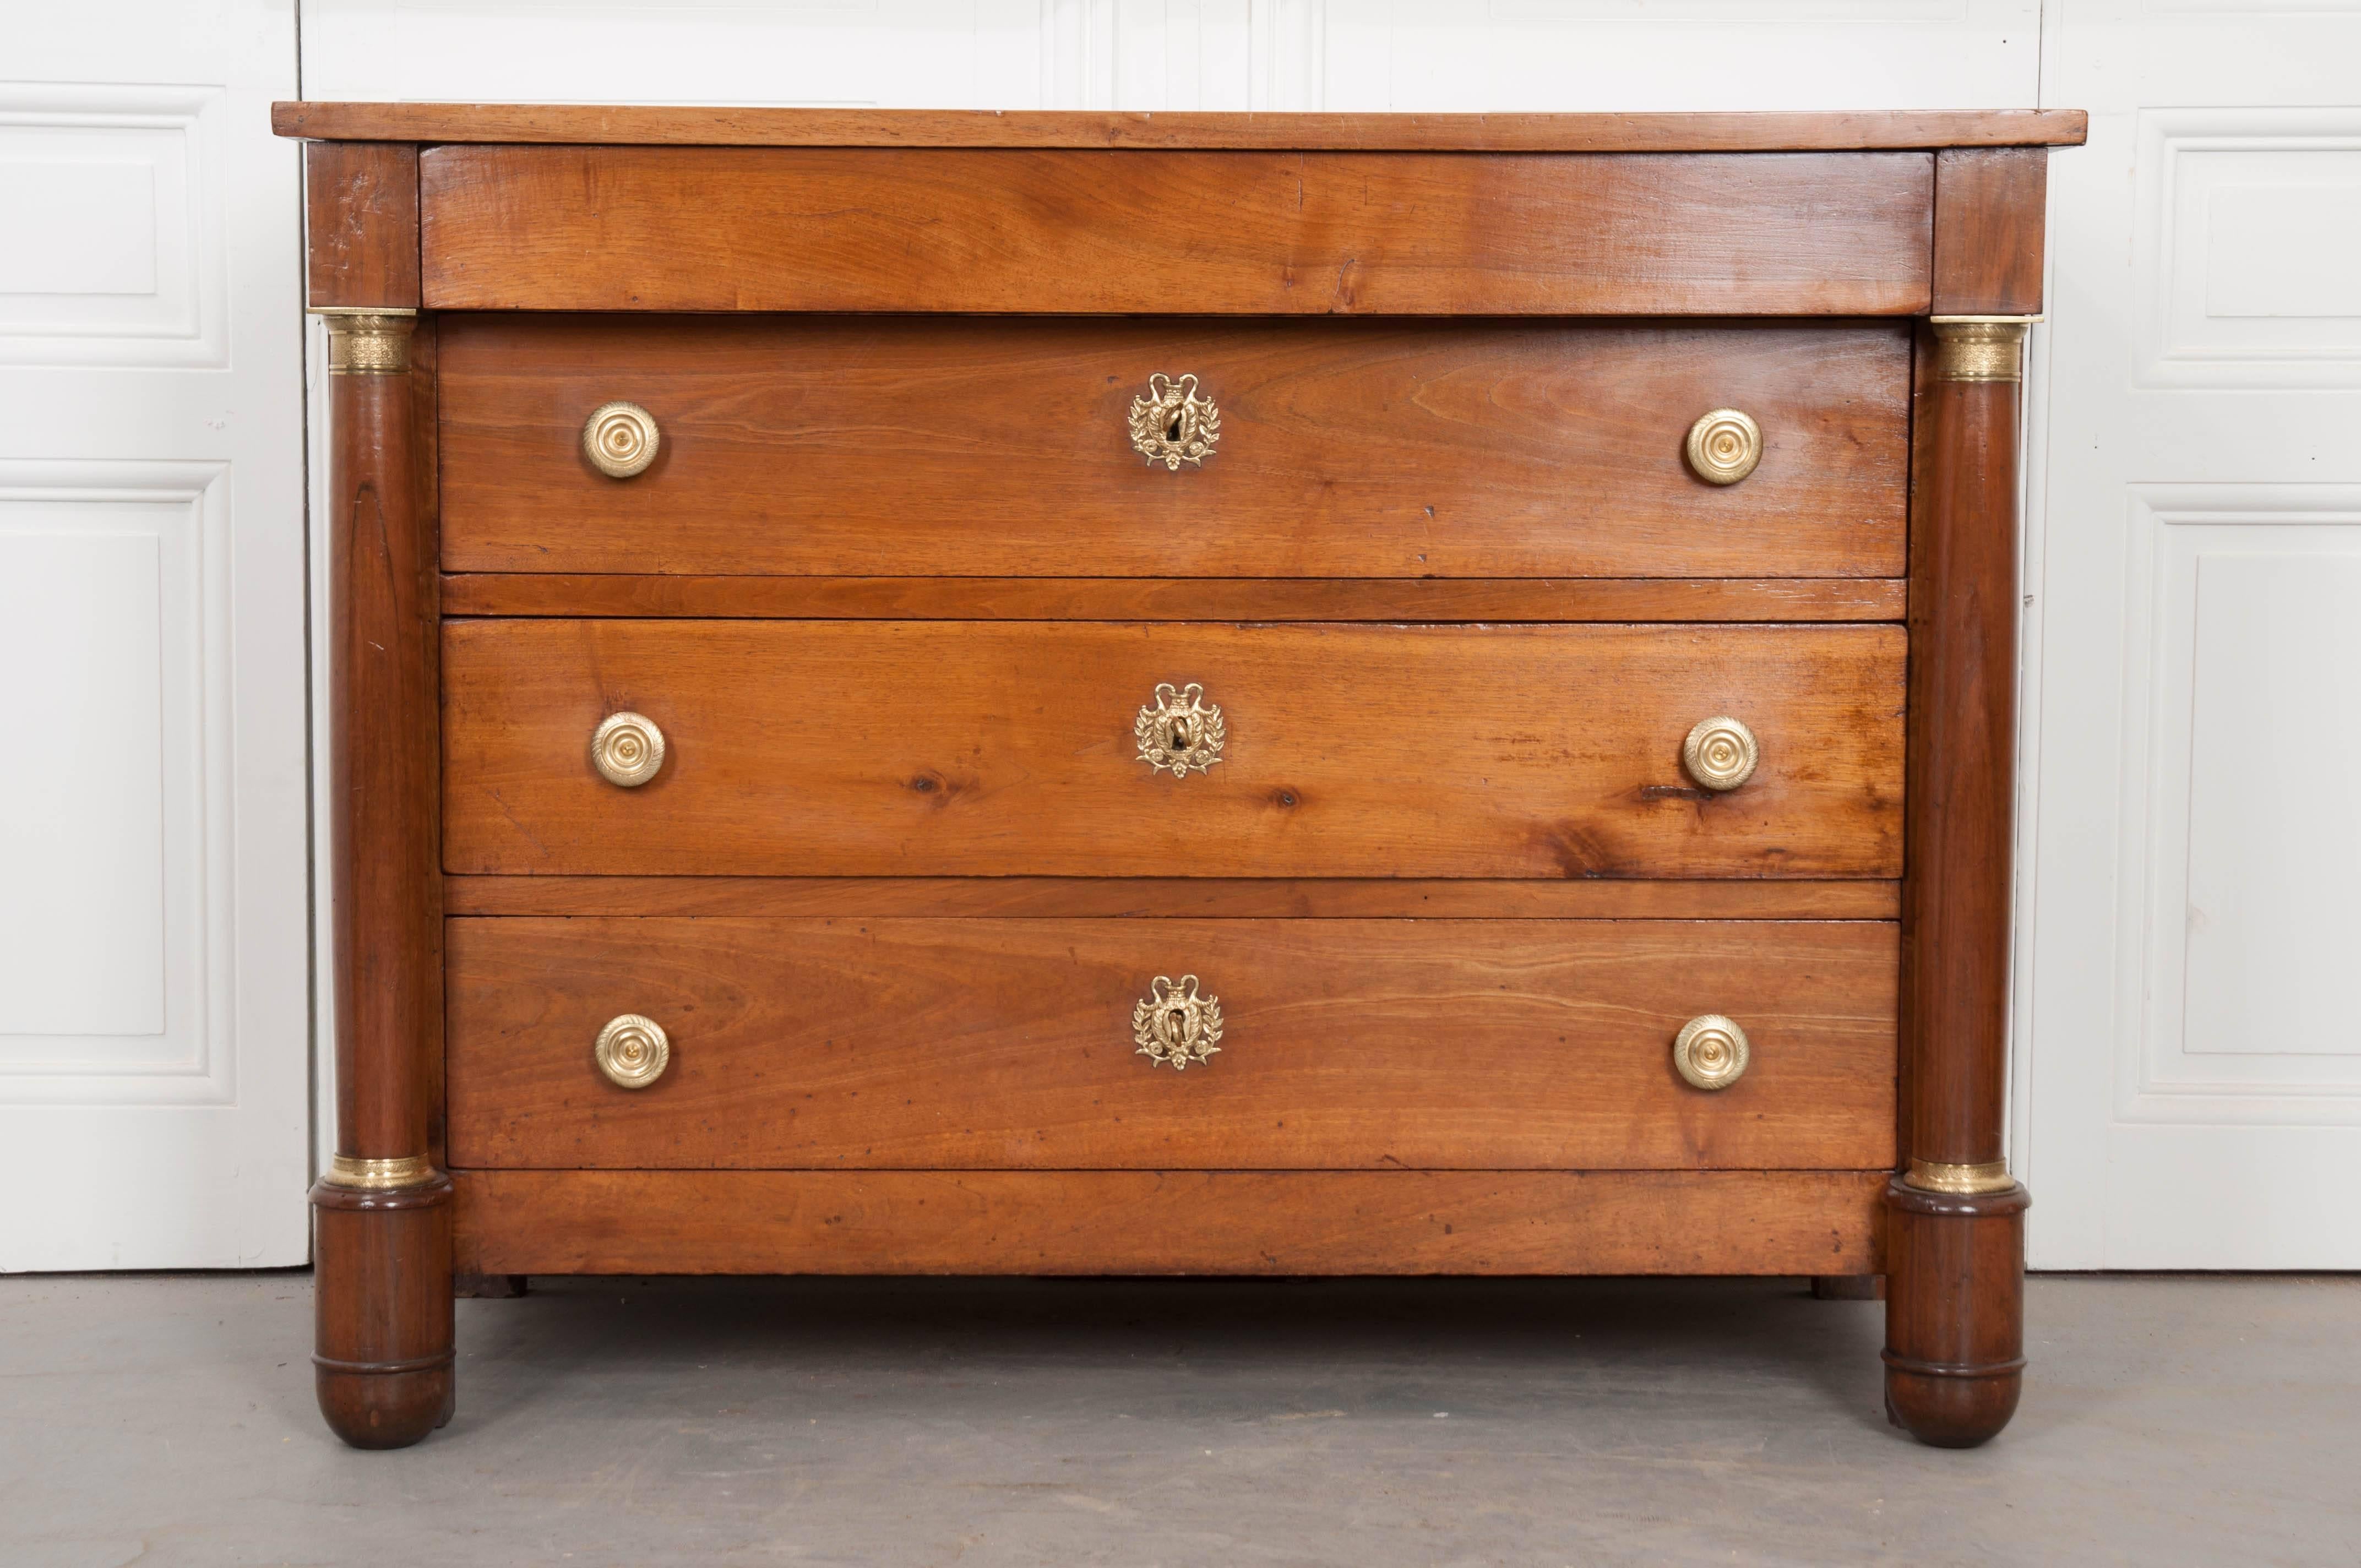 Great care was taken through the years to maintain this exceptional solid walnut Empire period commode from France. The commode is complete with four total drawers, the topmost being hidden in the apron. The three lower drawers are all of equal